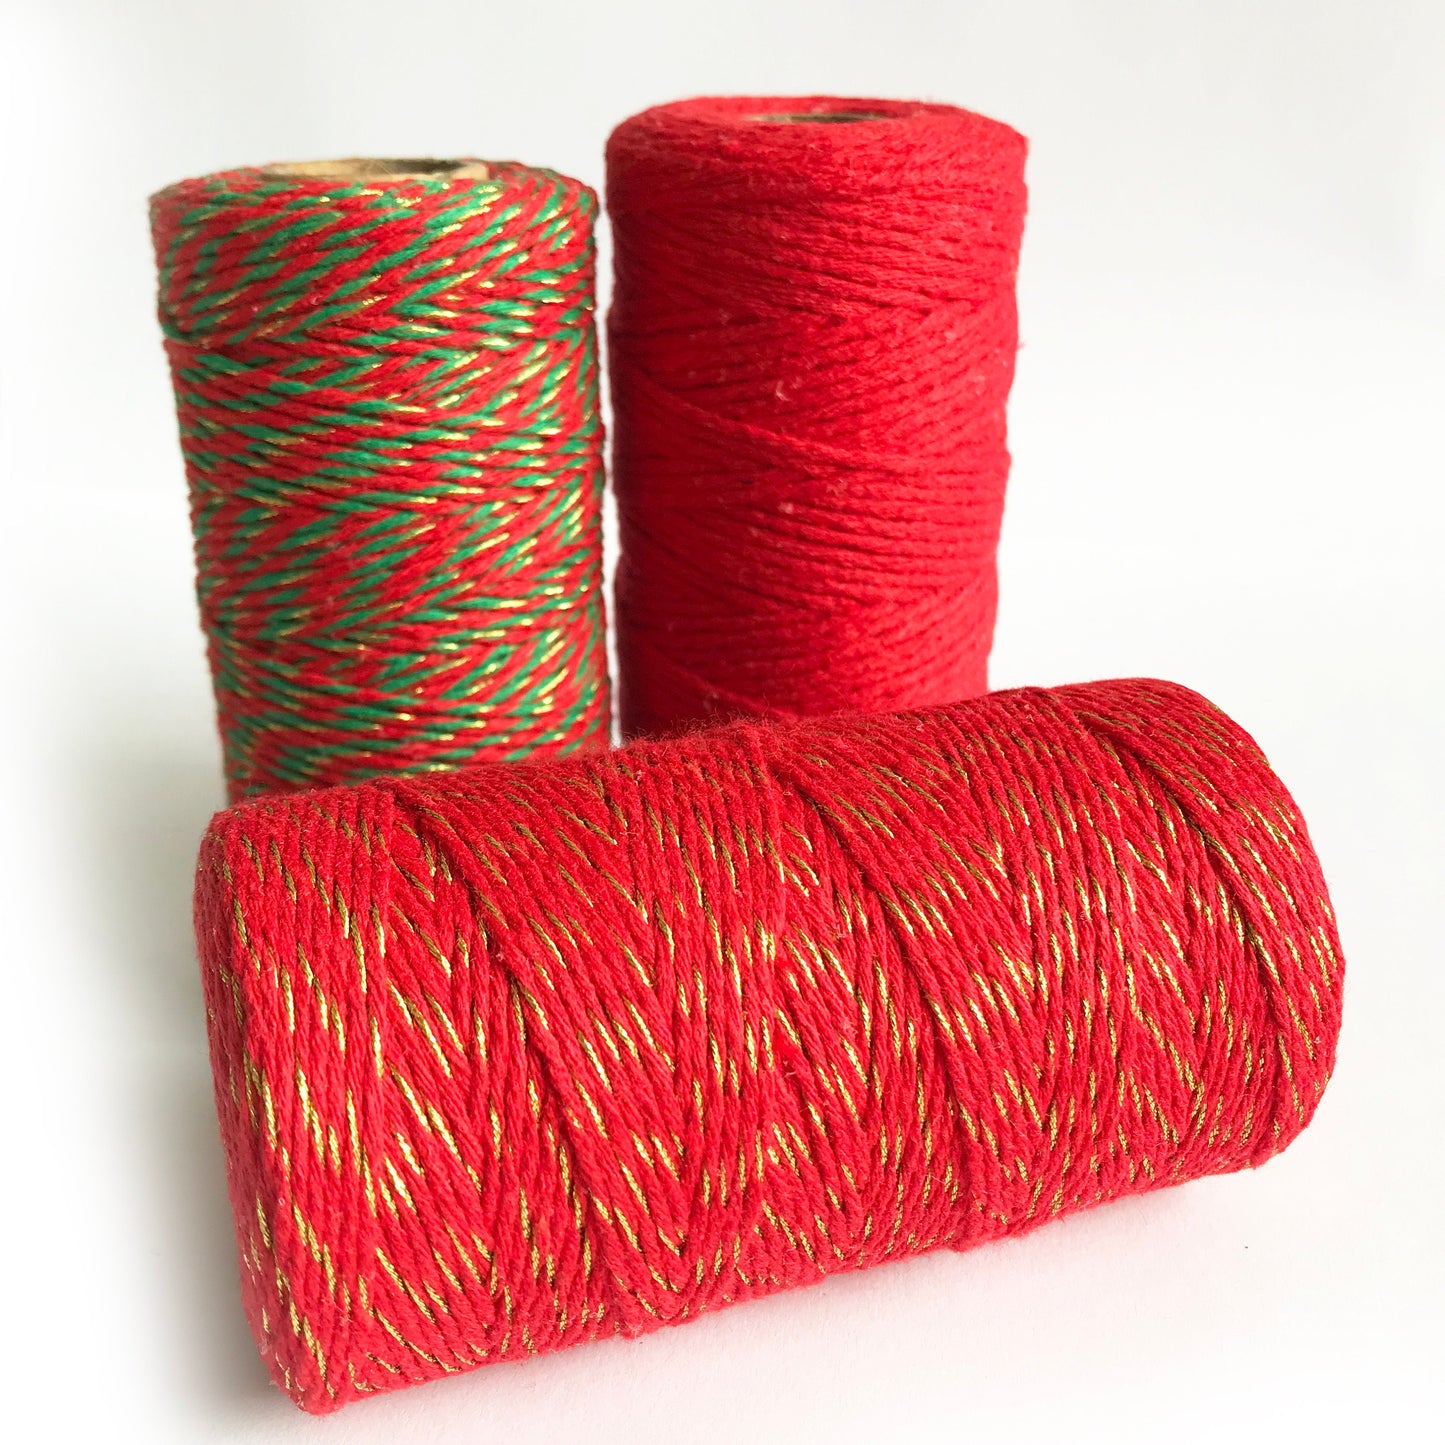 Metallic Lurex Bakers Twine 100m Roll | Wrapping Craft Rustic String | Gold Silver White Natural Red Green Metallic